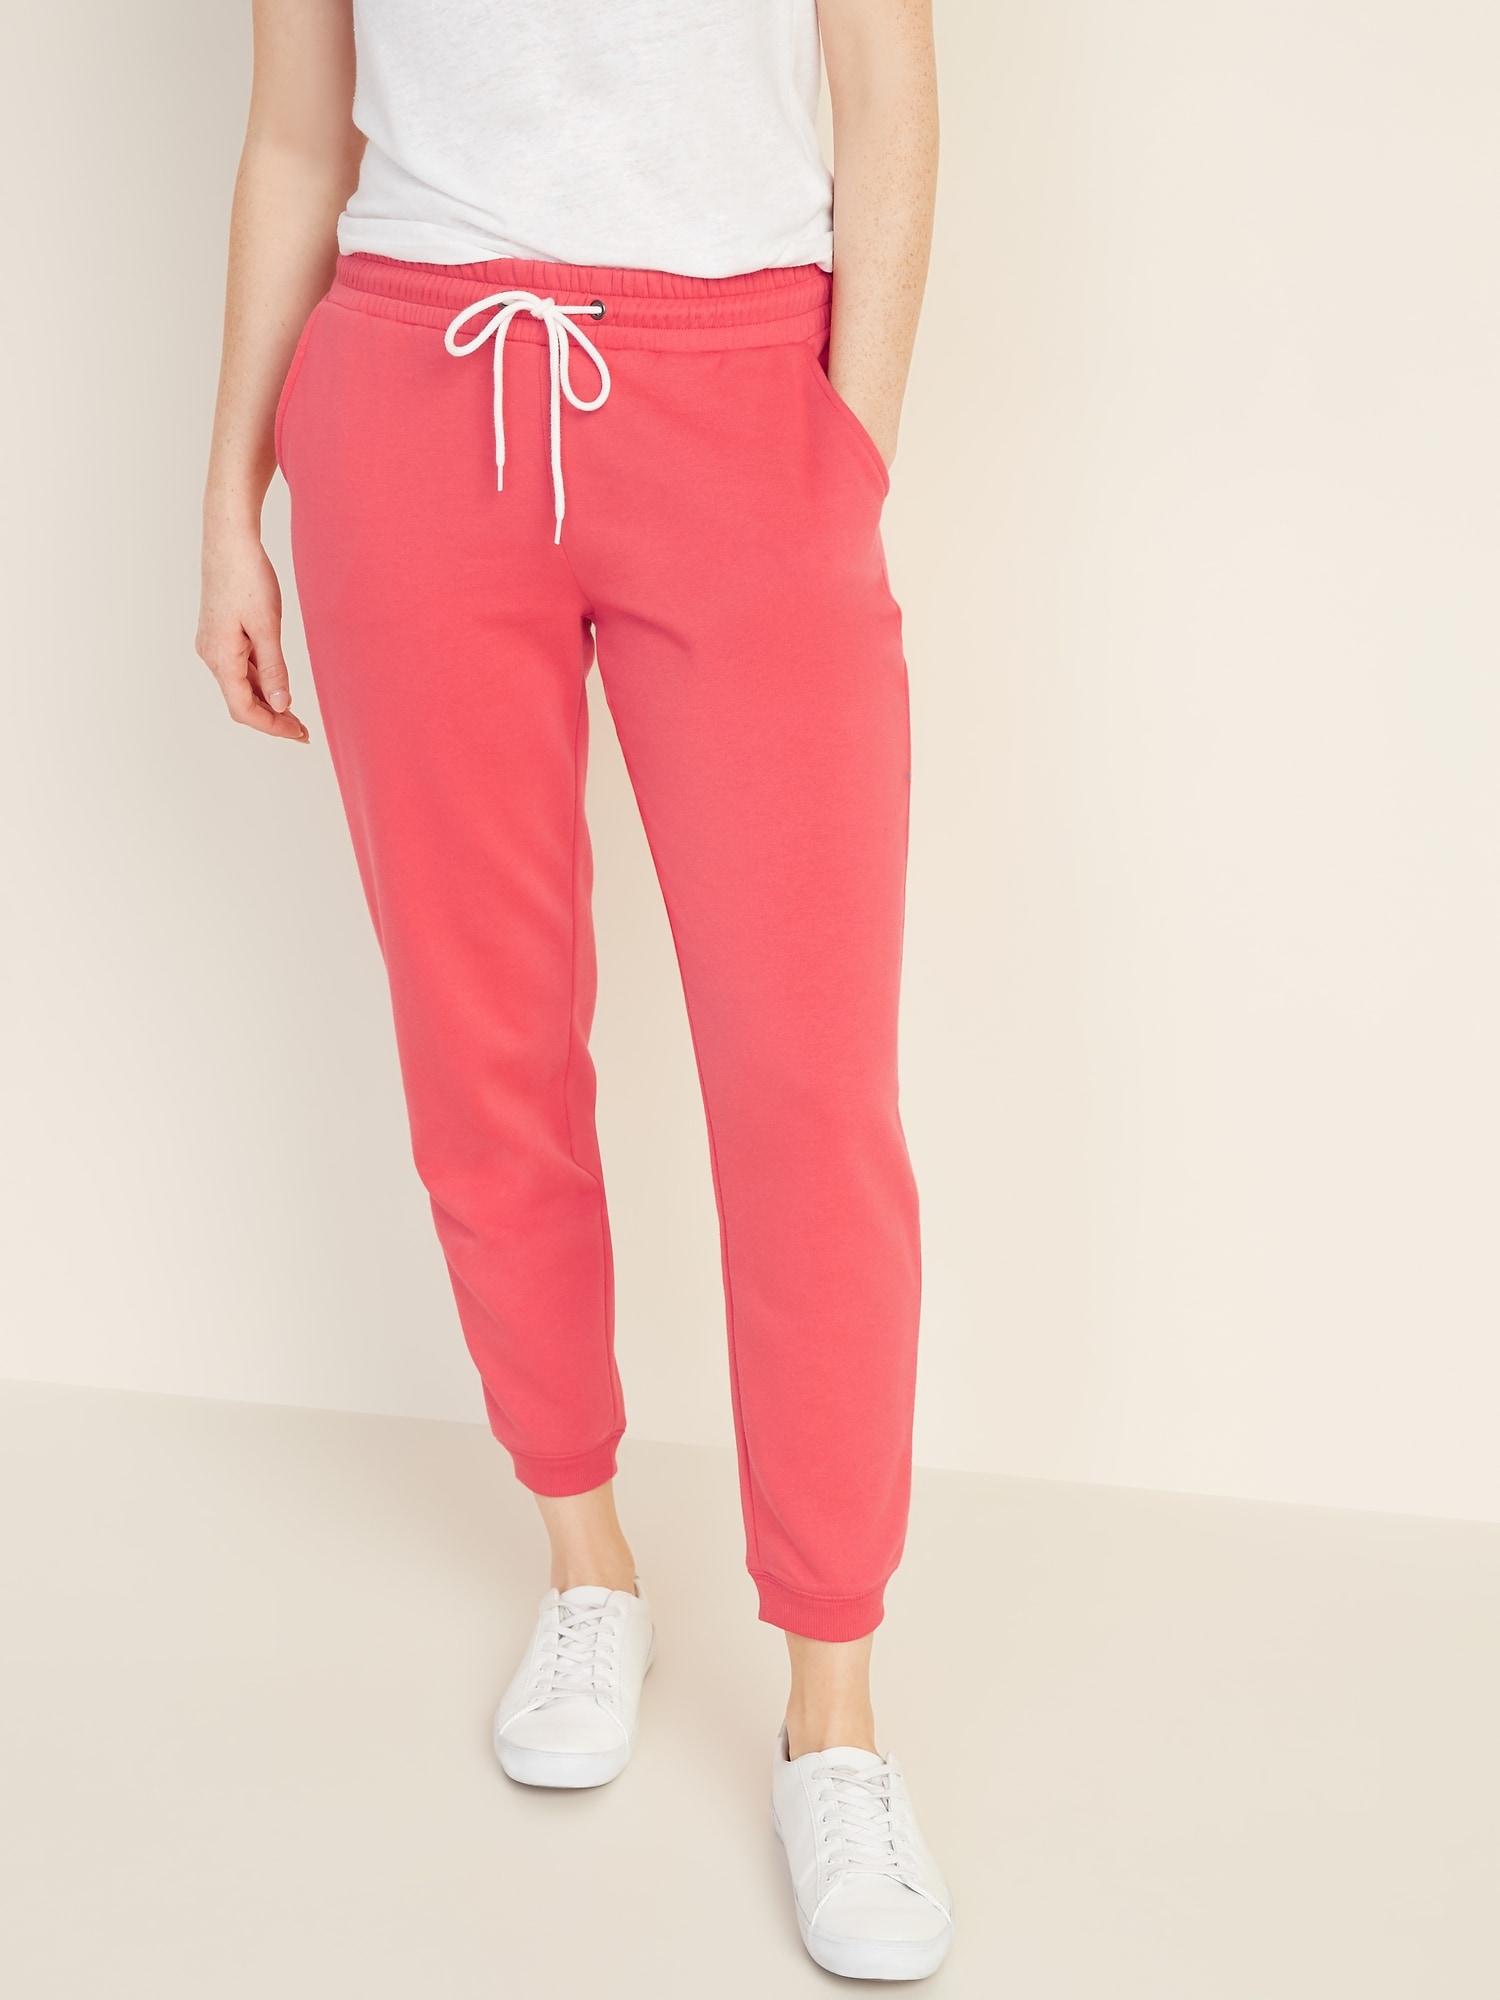 French-Terry Jogger Pants for Women